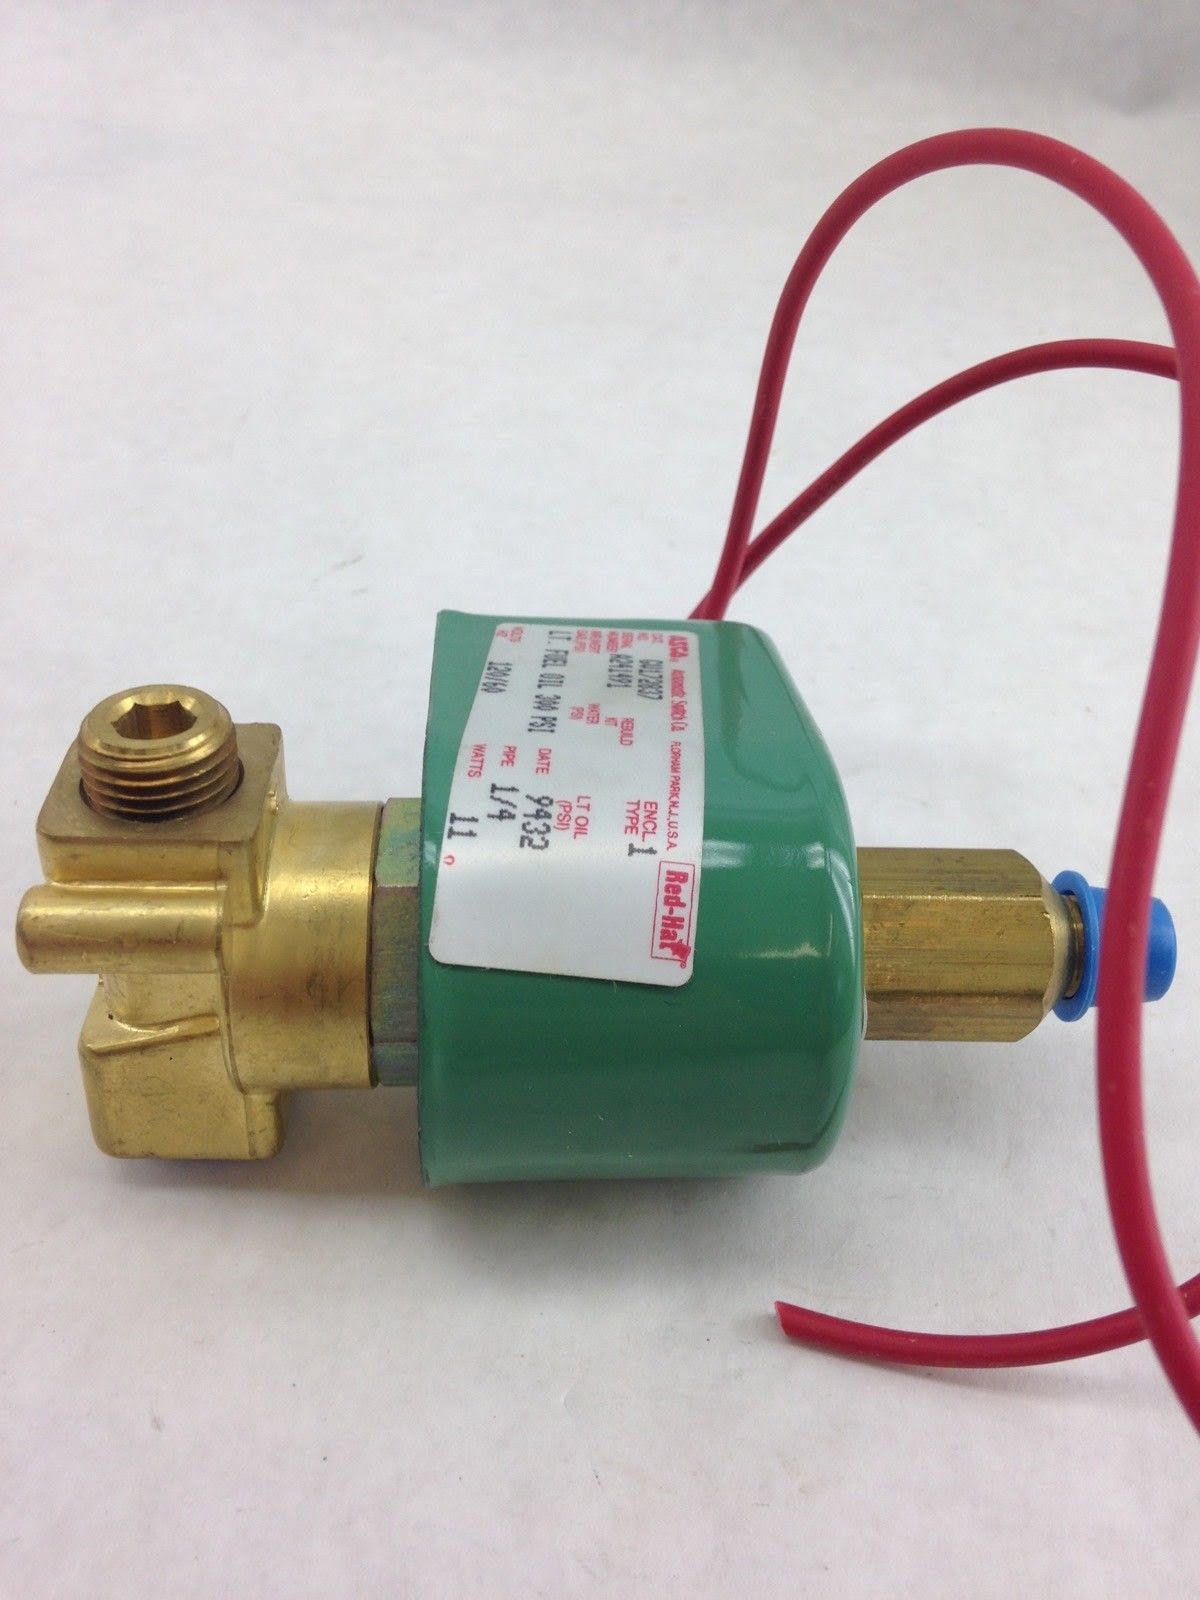 ASCO RED HAT GV172837 SOLENOID VALVE A241491 A820 